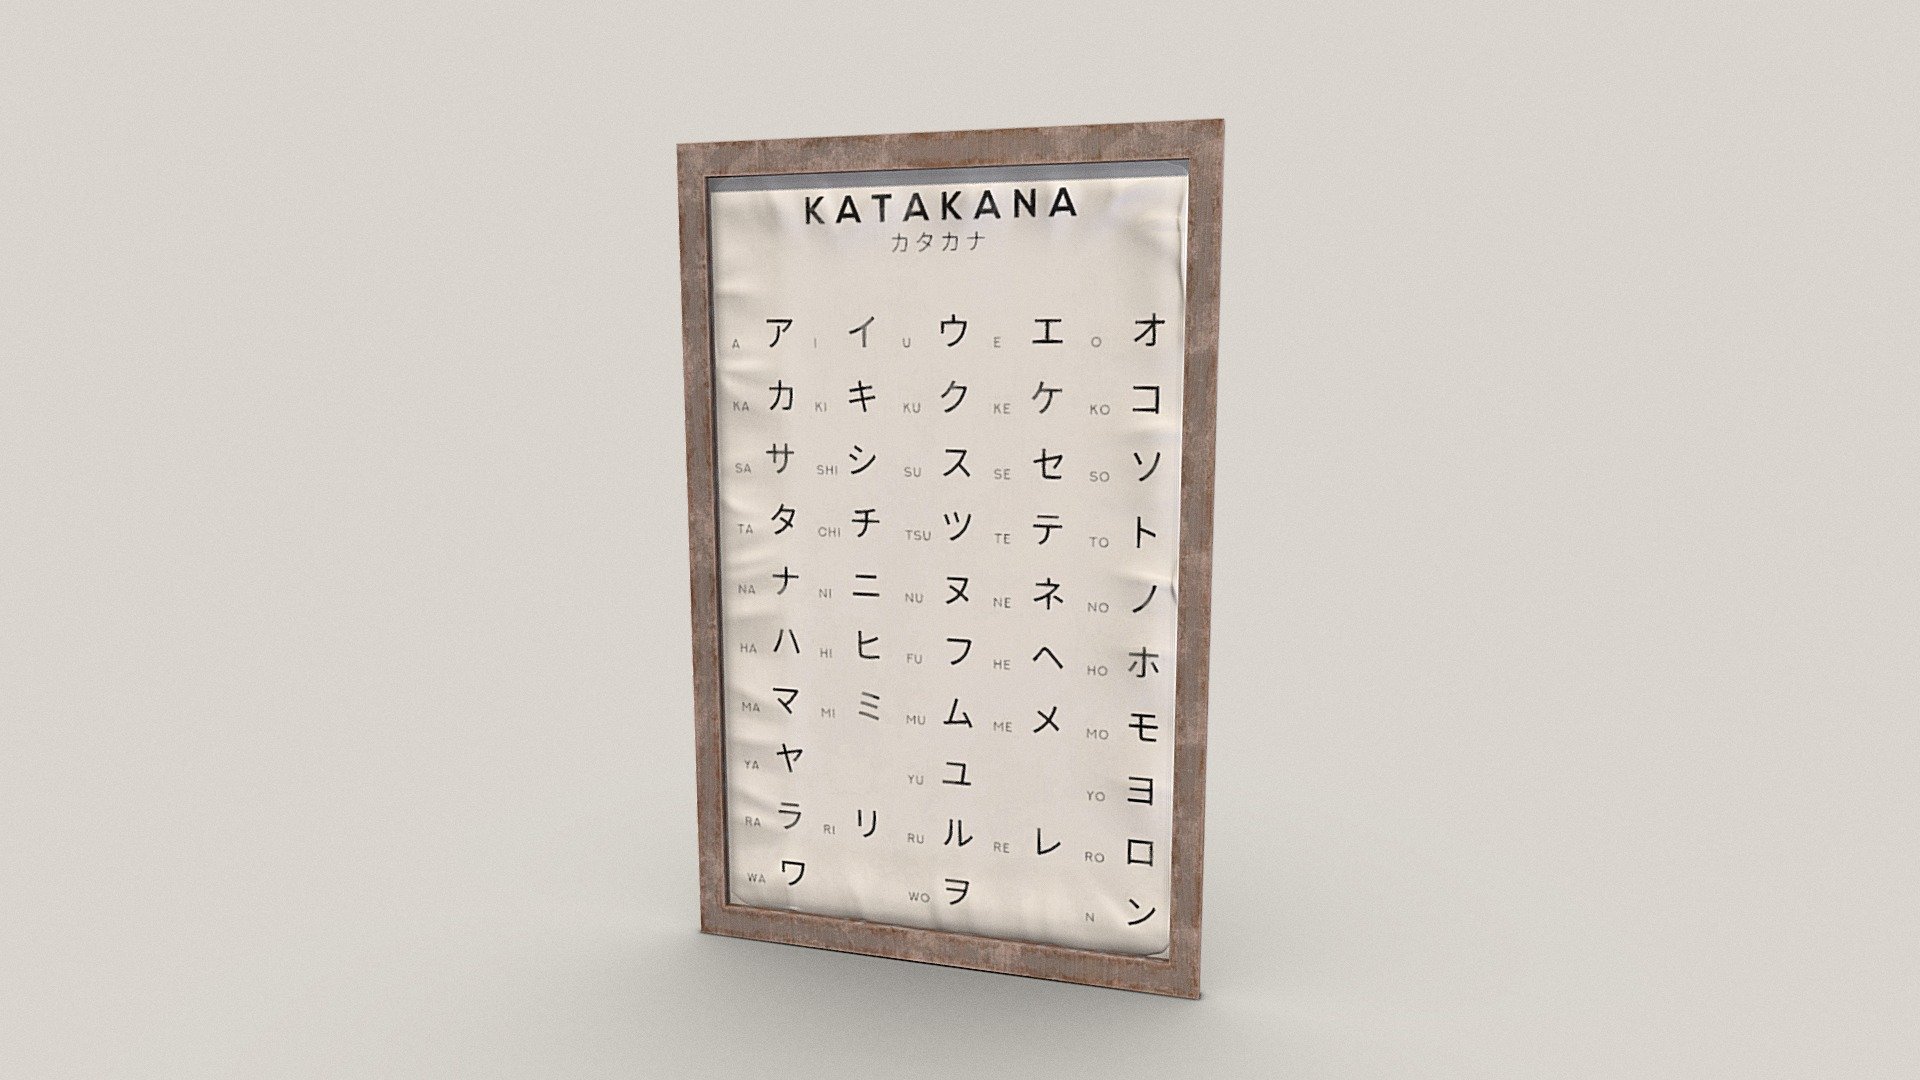 A simple katakana alphabet poster, useful prop for any sort of japanese interior environment such as a school or classroom.  

Has paper folds and a worn/vintage look.

PBR textures @2k - katakana alphabet poster - Download Free 3D model by Sousinho 3d model